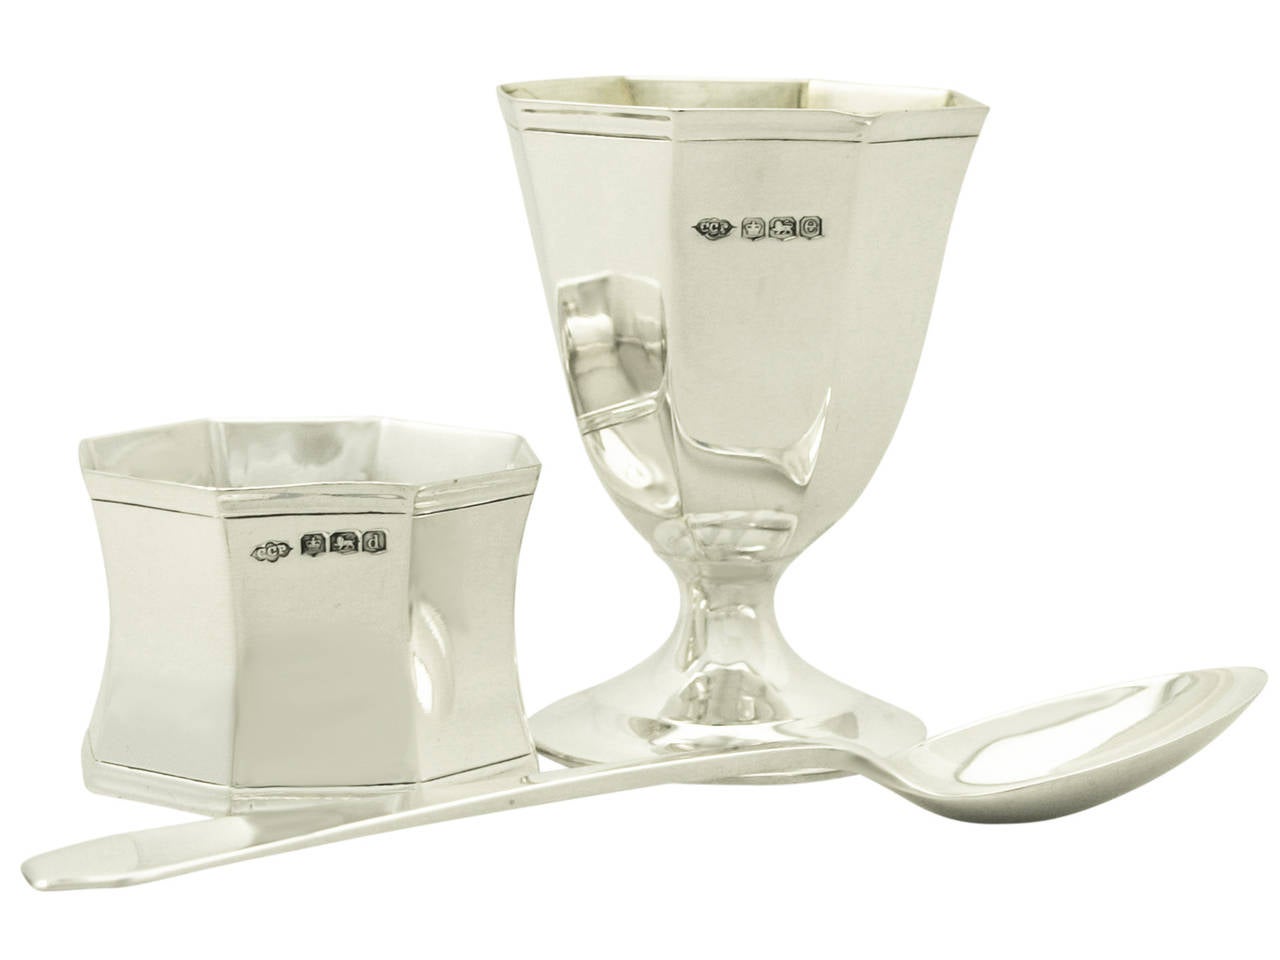 A fine antique George V English sterling silver three piece christening set in the Art Deco style - boxed; an addition to our christening silverware collection.

This fine antique George V sterling silver christening set consists of an egg cup, a